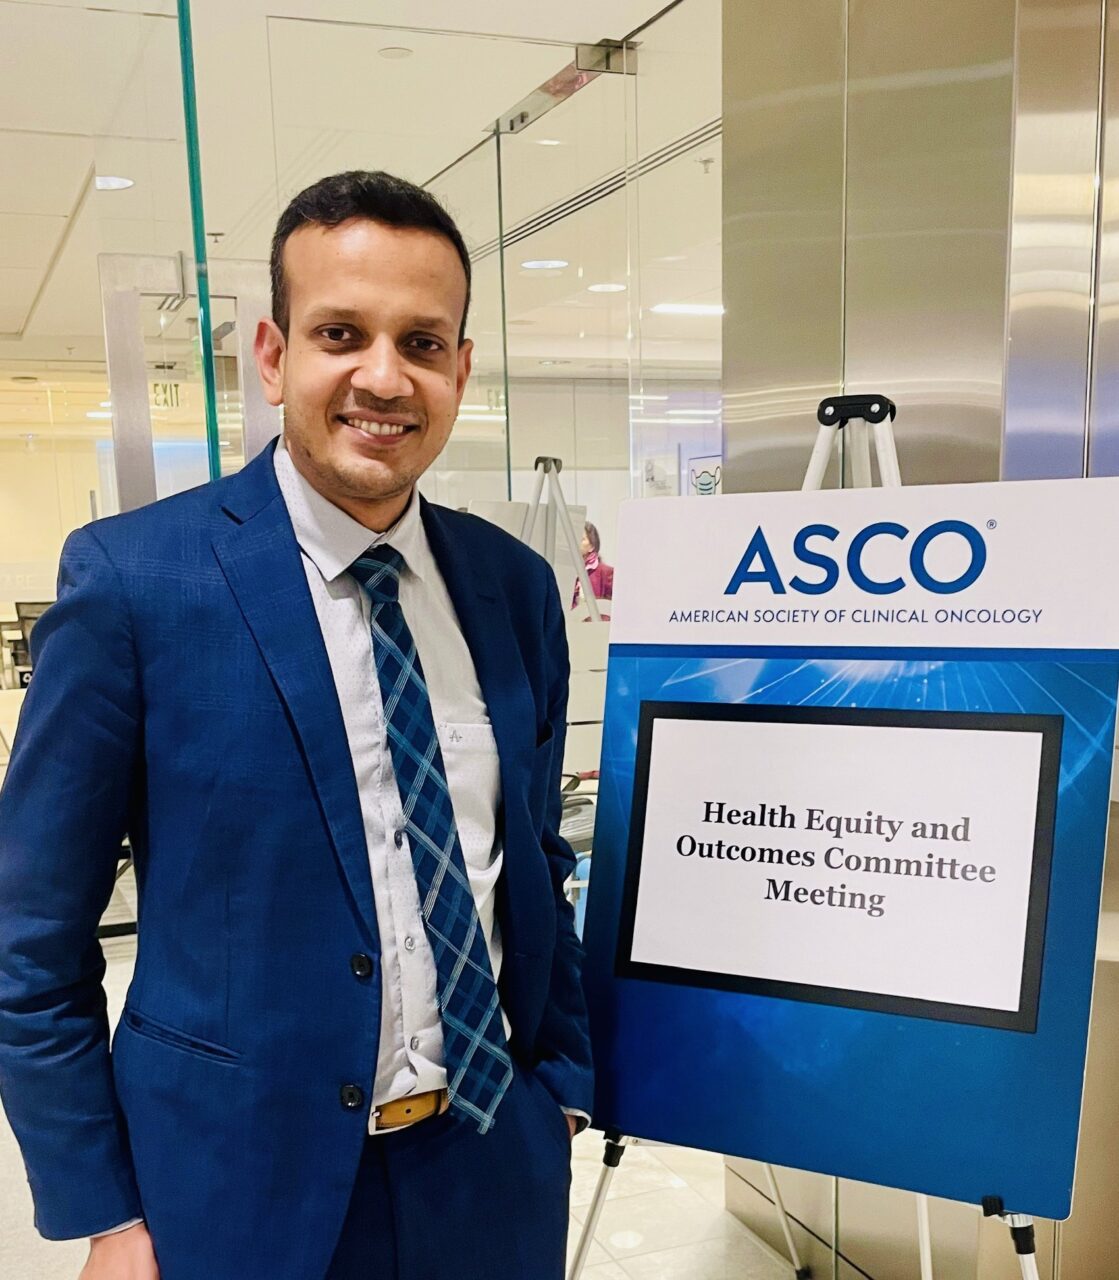 Sid Yadav: Last meeting of the now sunsetting ASCO Health Equity and Outcomes Committee